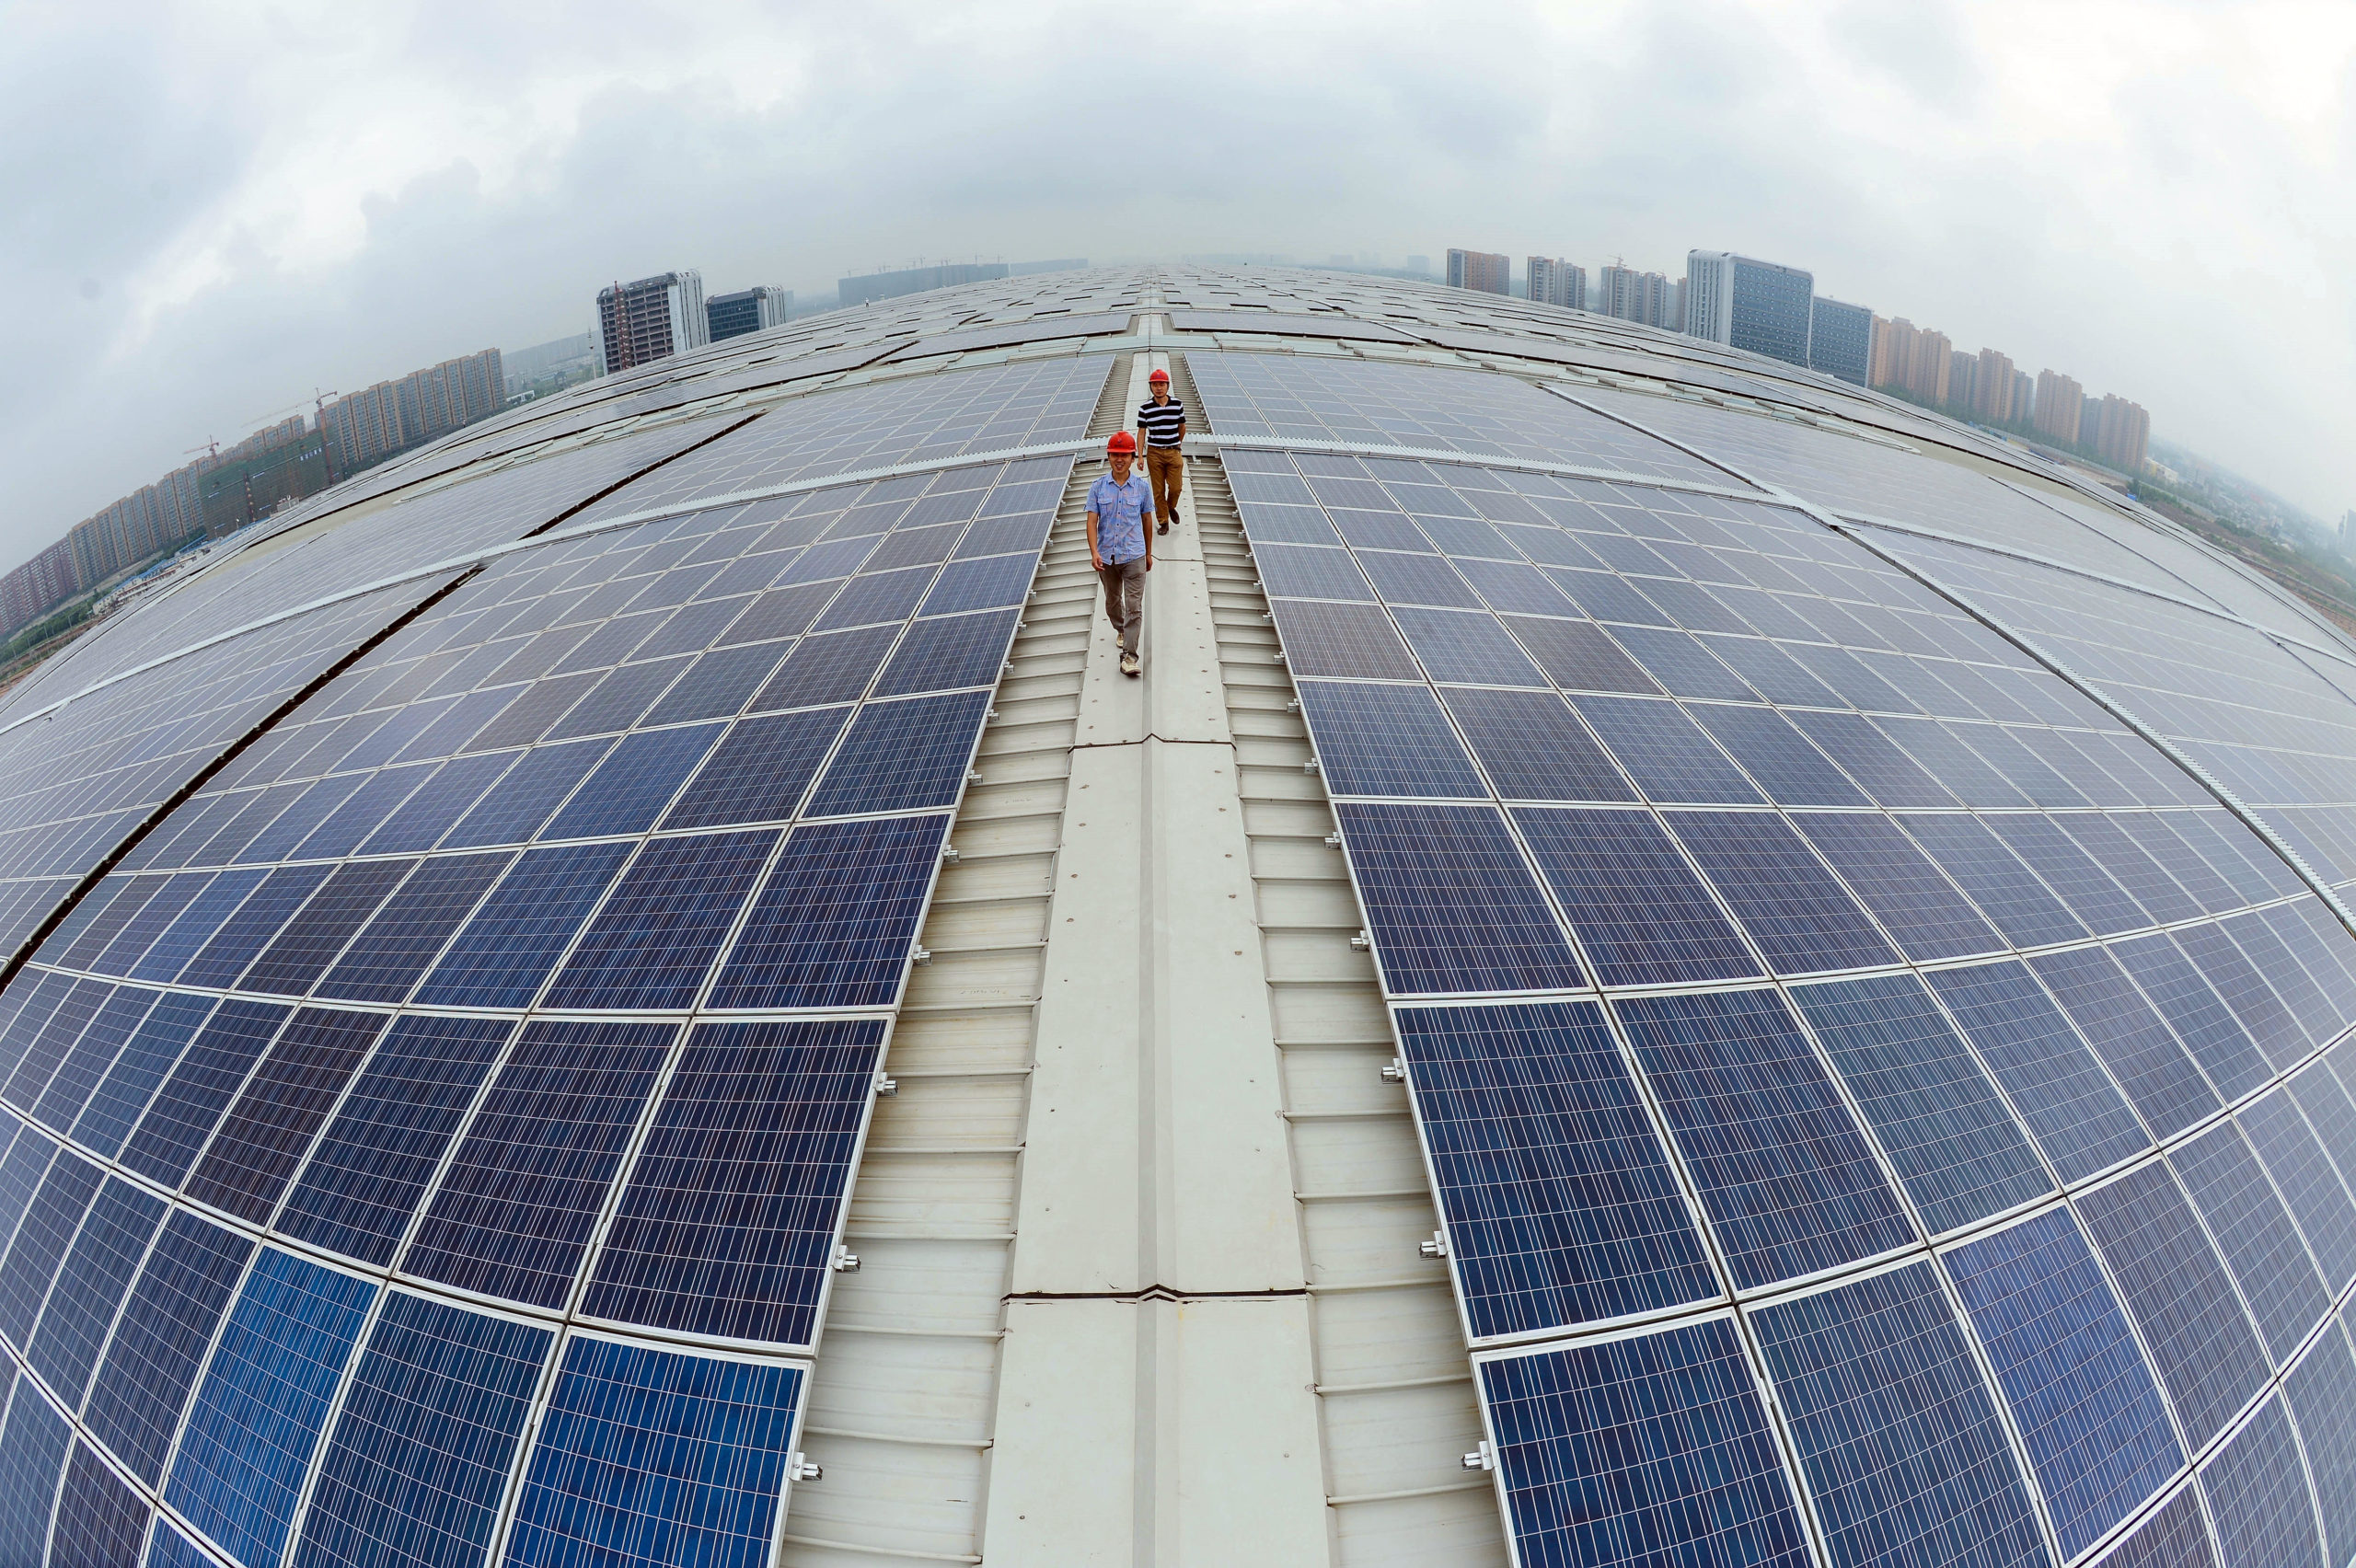 Photovoltaics atop a railway station in Hangzhou (Image: Alamy)